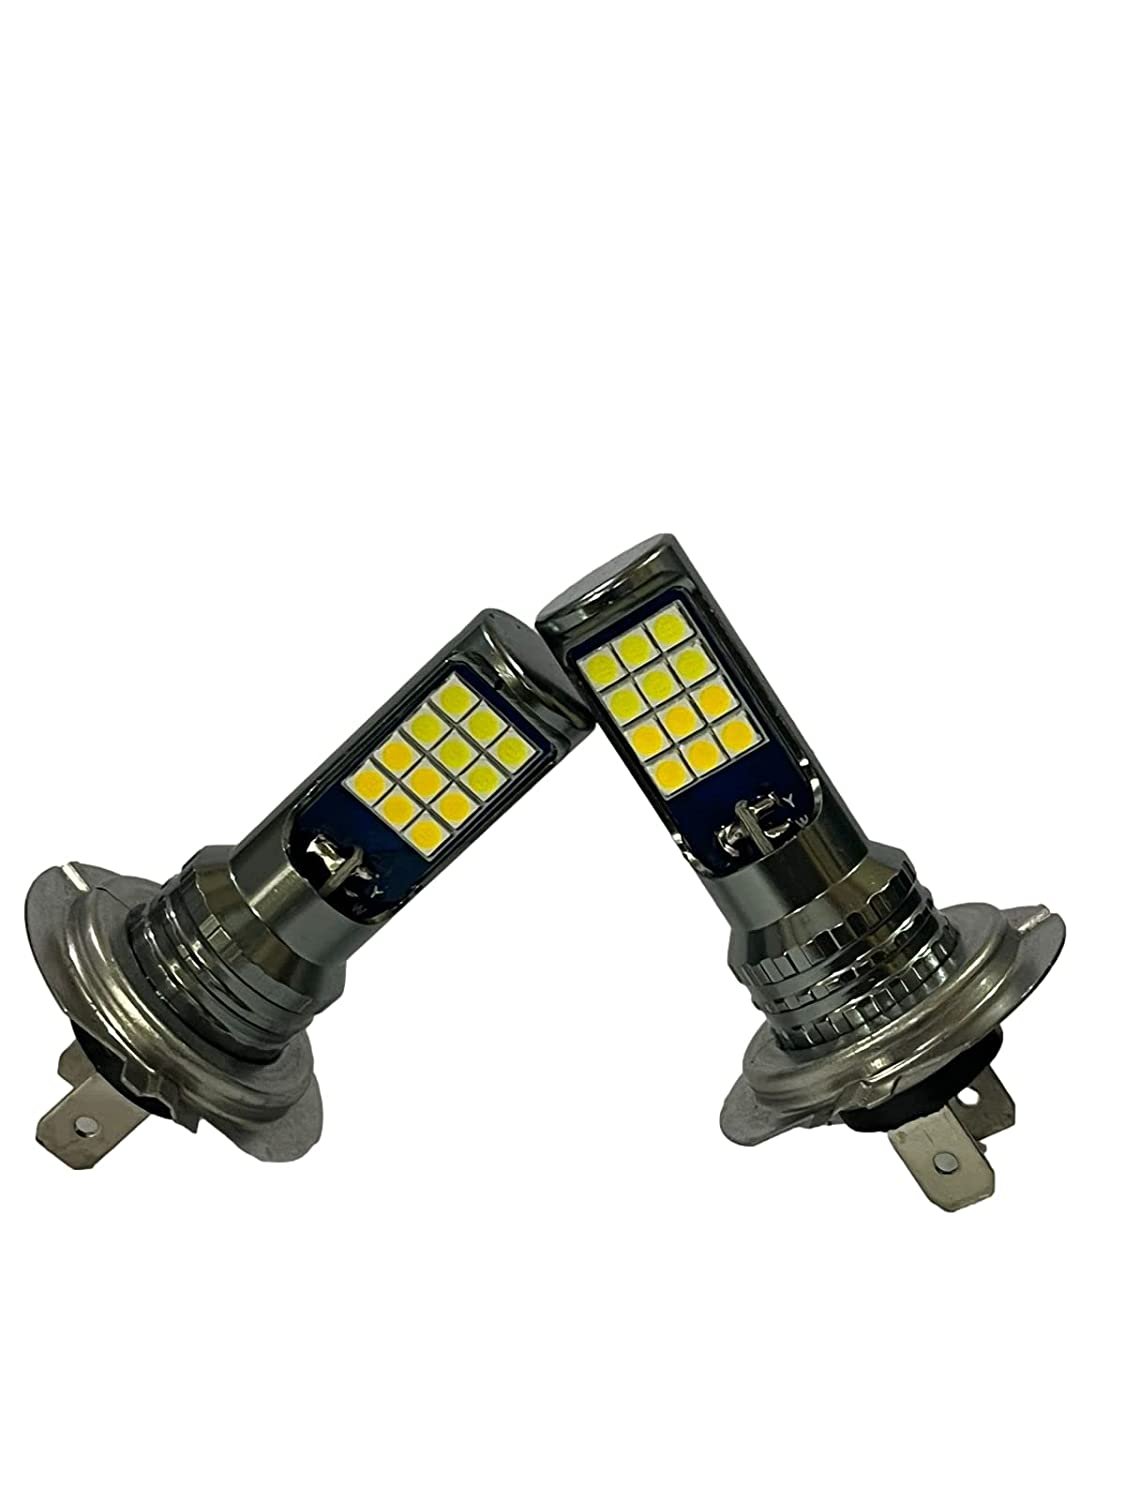 Car Headlight H7 Dual Color Yellow White led Headlights for Car and Bike(2 Pieces)